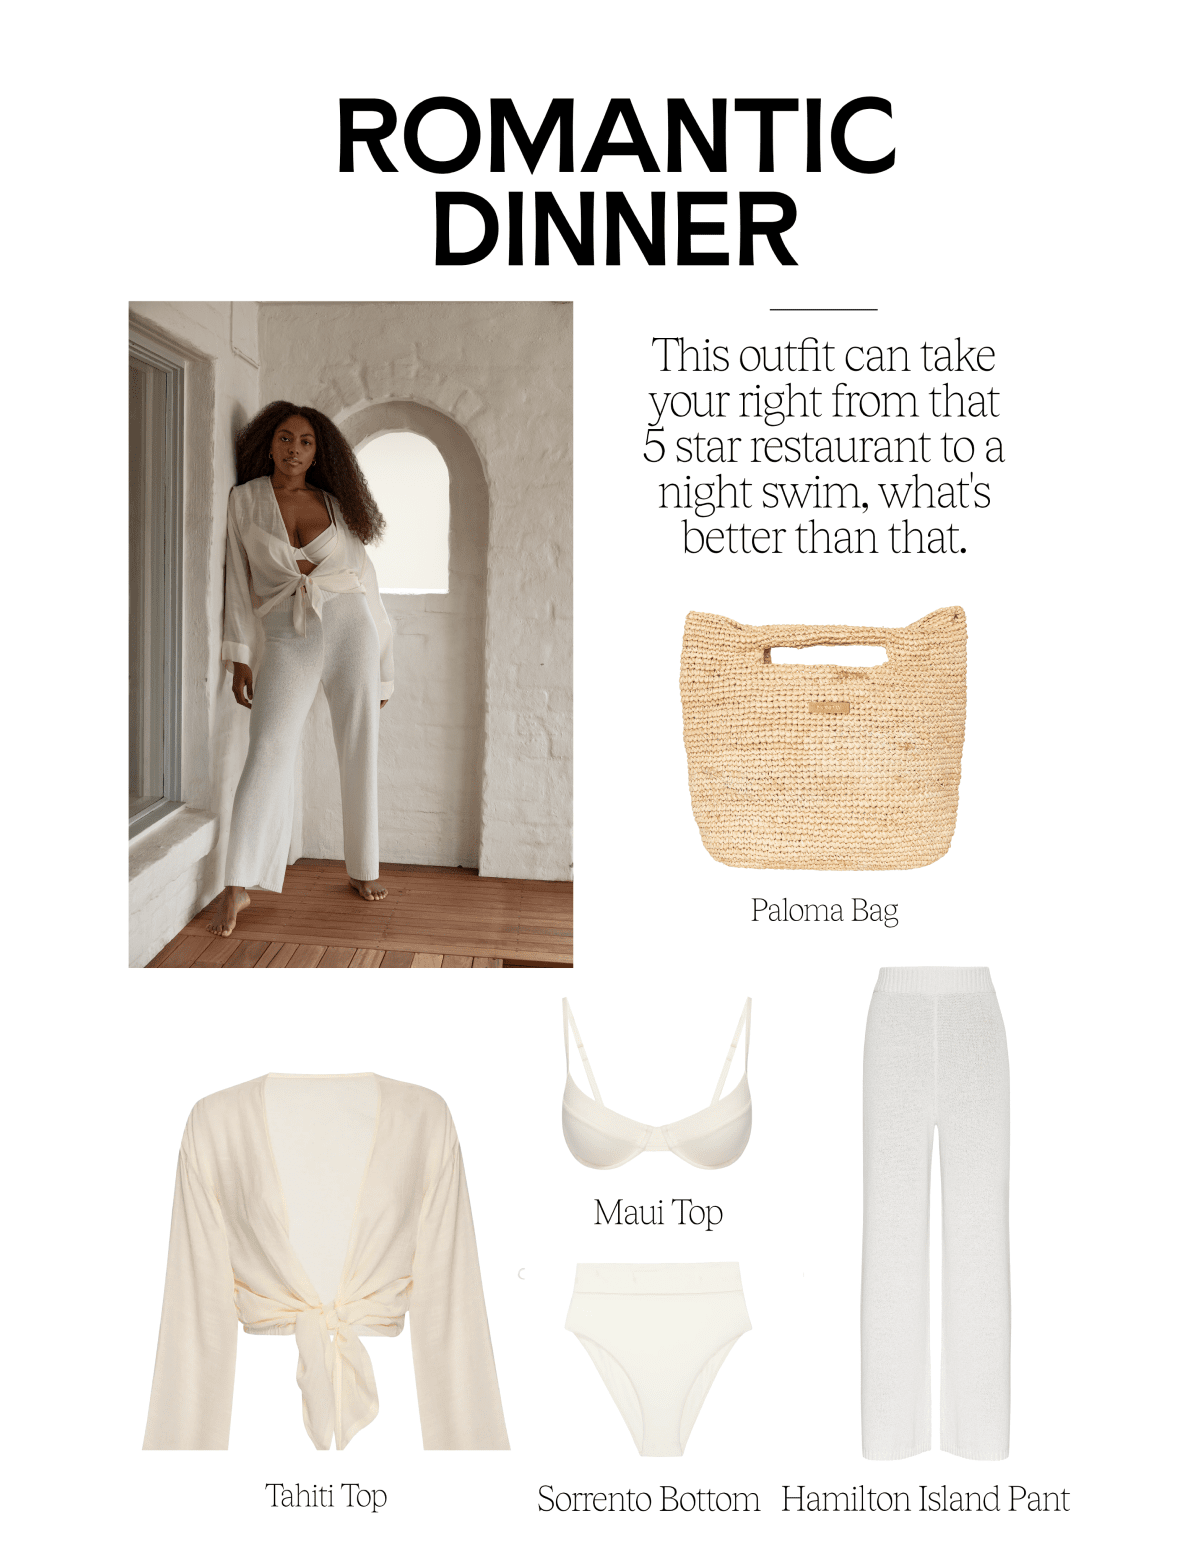 ROMANTIC DINNER This outfit can take your right from that 5 starrestaurant to a night swim, what's better than that. Paloma Bag i j Jy Maui Top N 4 Tahiti Top Sorrento Bottom Hamilton Island Pant 